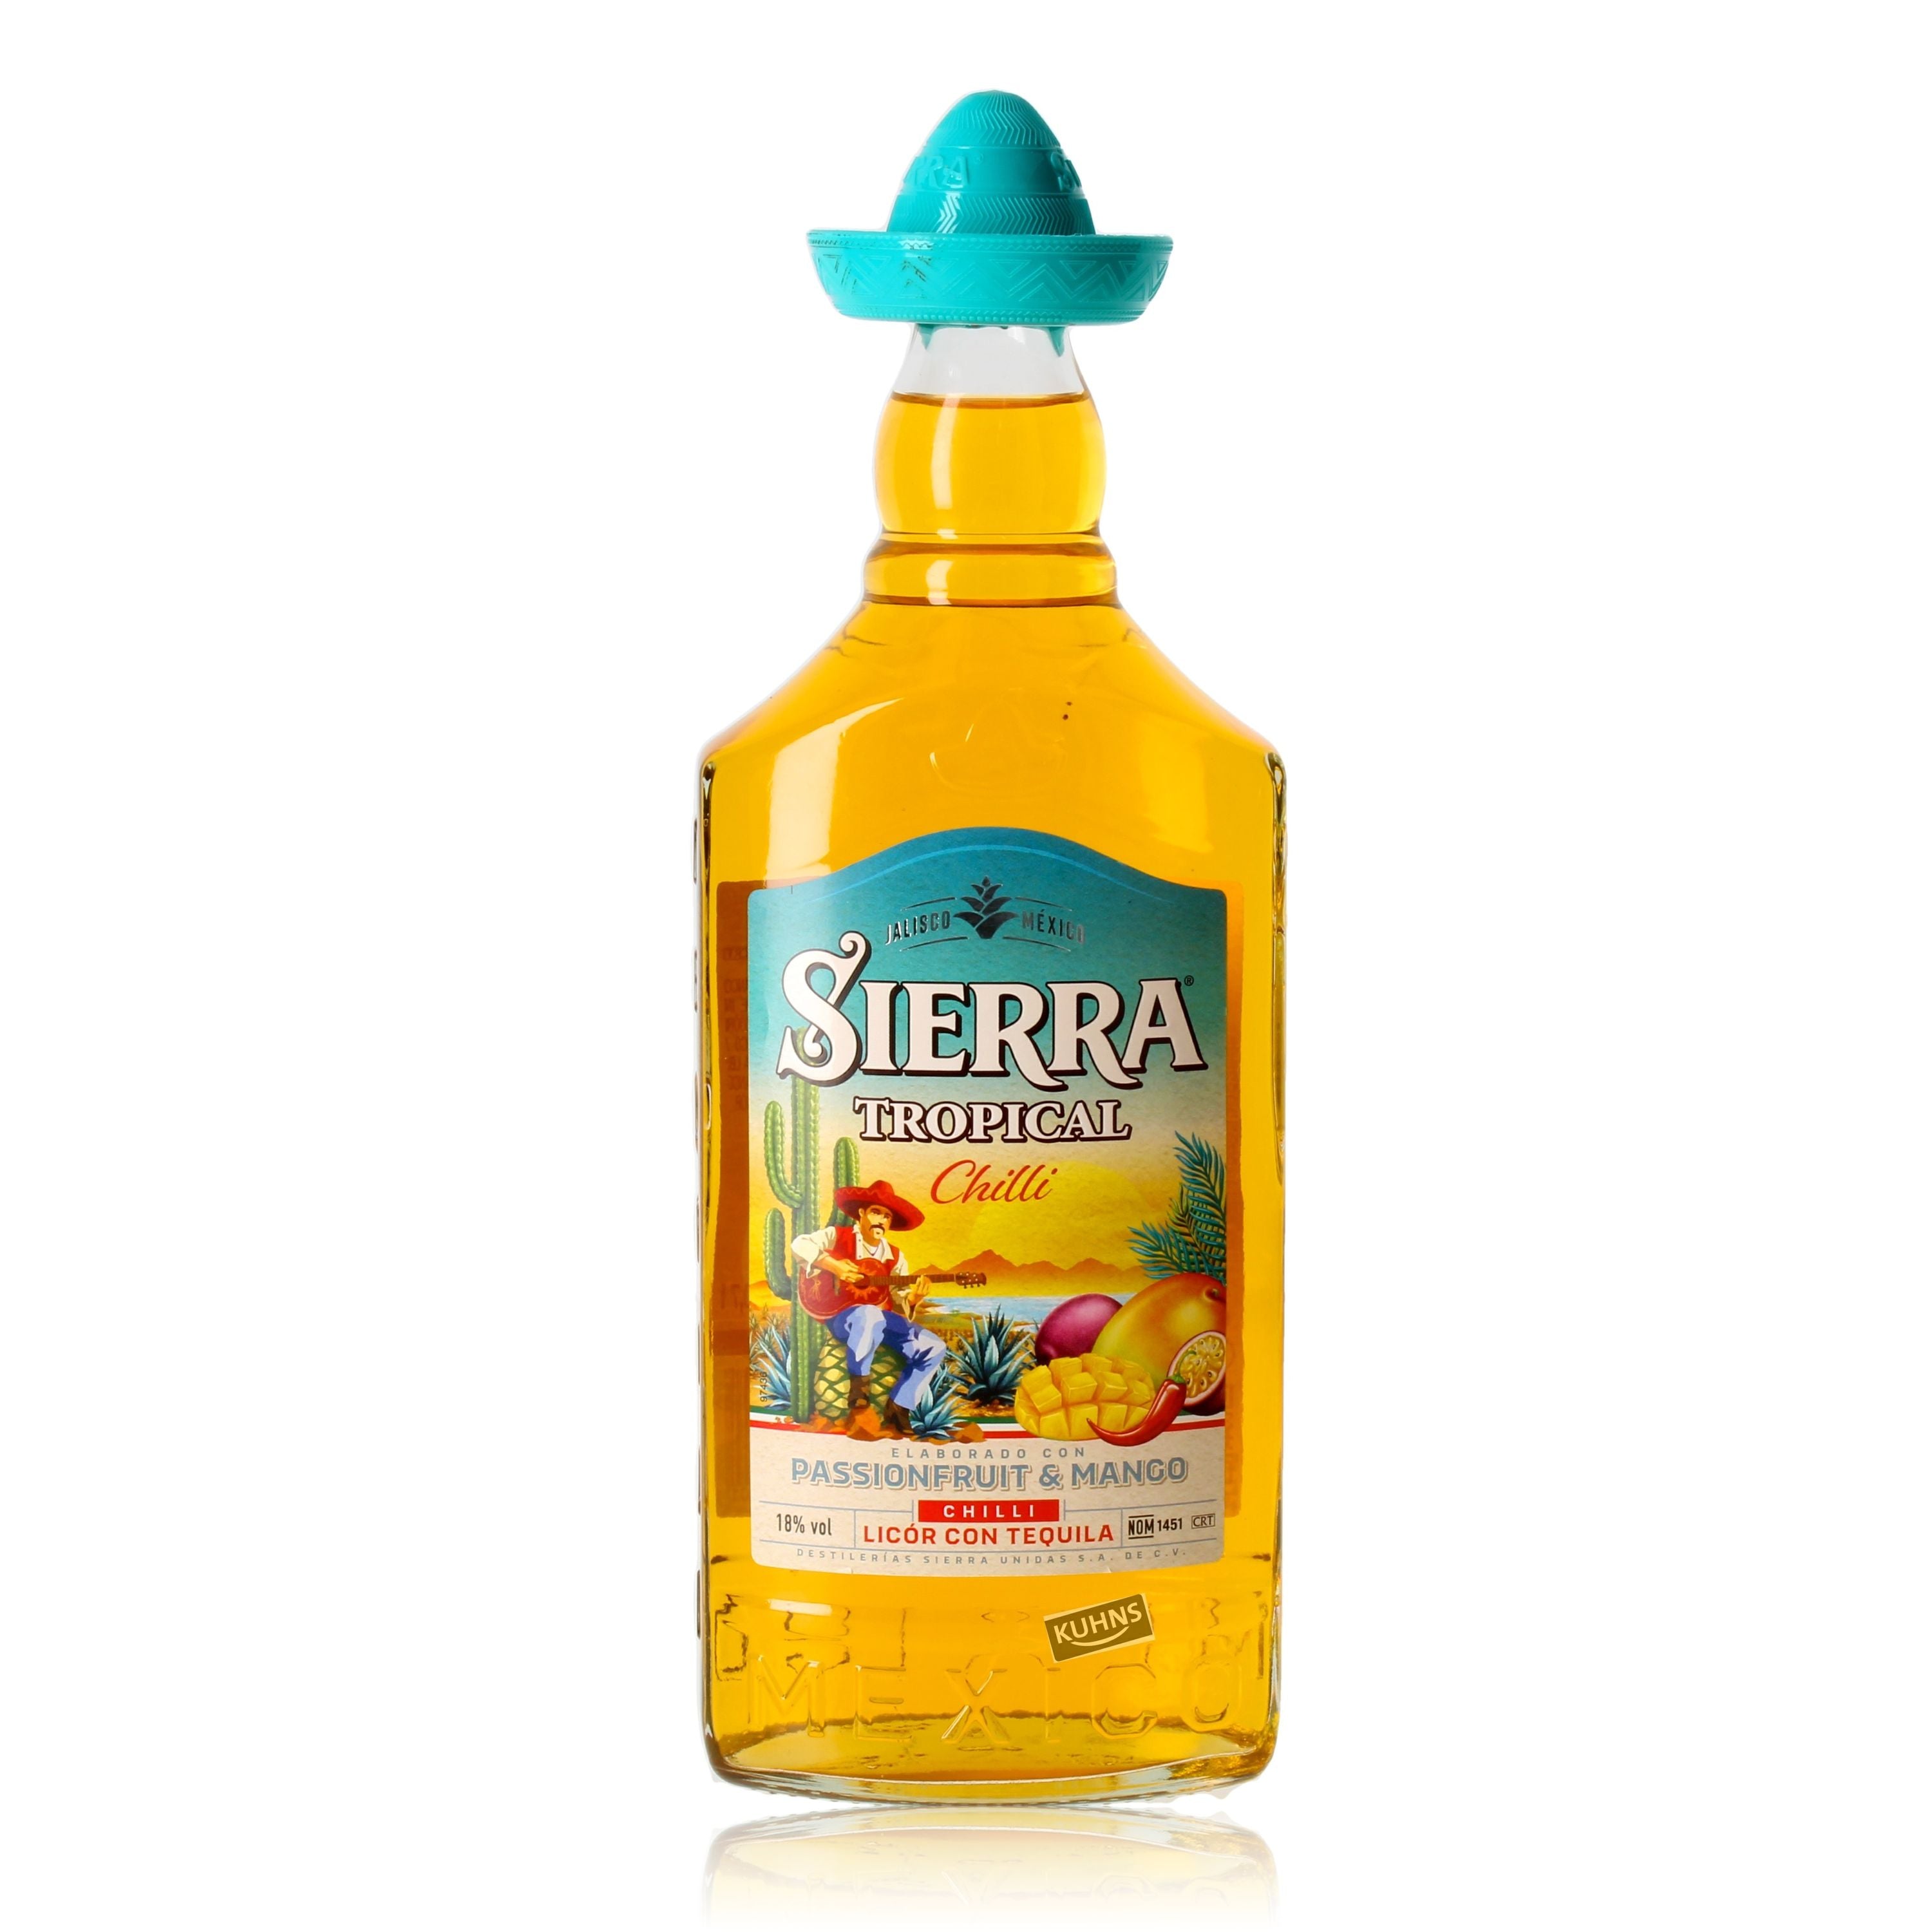 Sierra Tropical Chilli 0.7l, alc. 18% by volume, Tequila Mexico